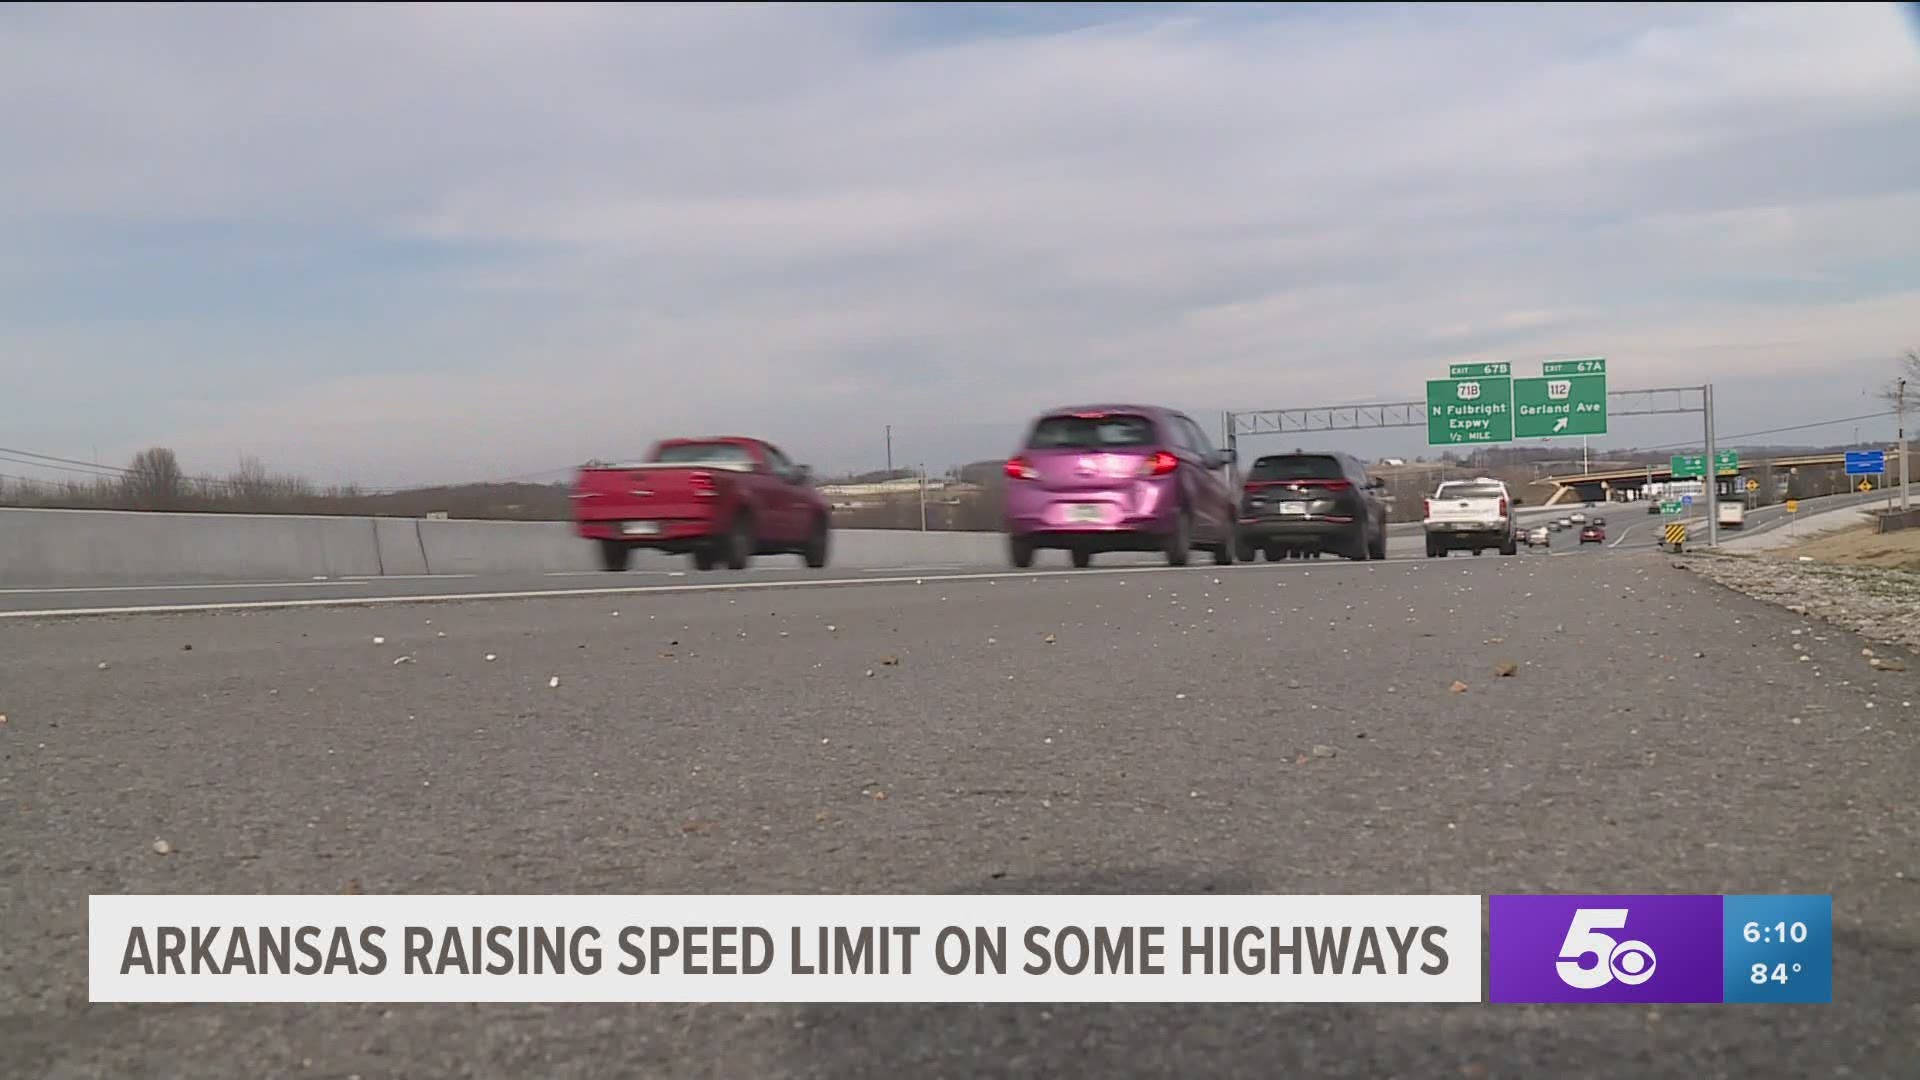 You will soon see the speed limit go up 5 mph on certain highways and interstates across Arkansas.